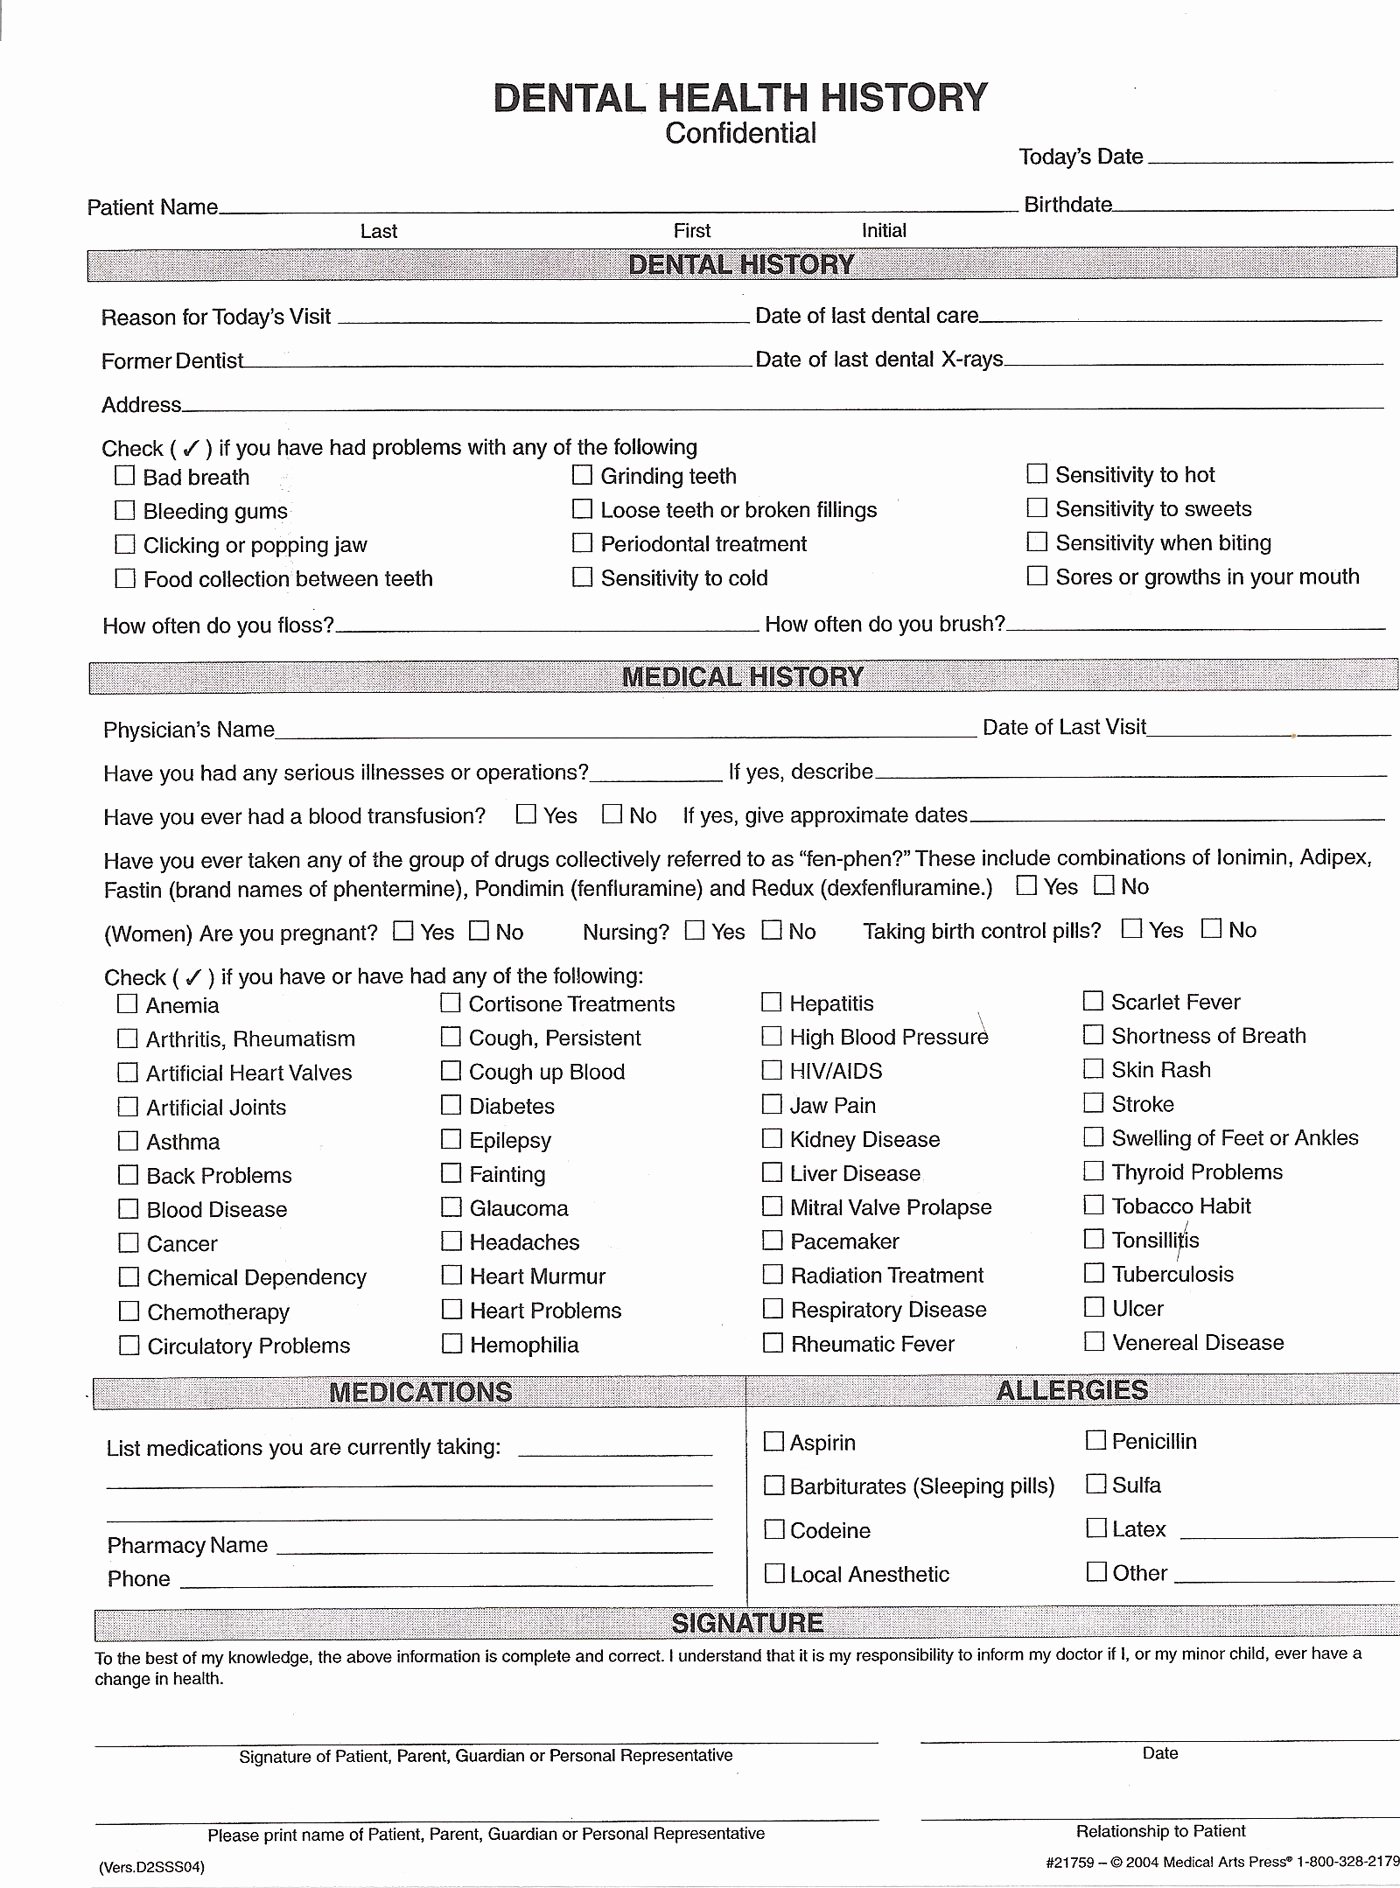 Dental Medical History form Template Best Of Medical History forms Health History form Click On to View forms